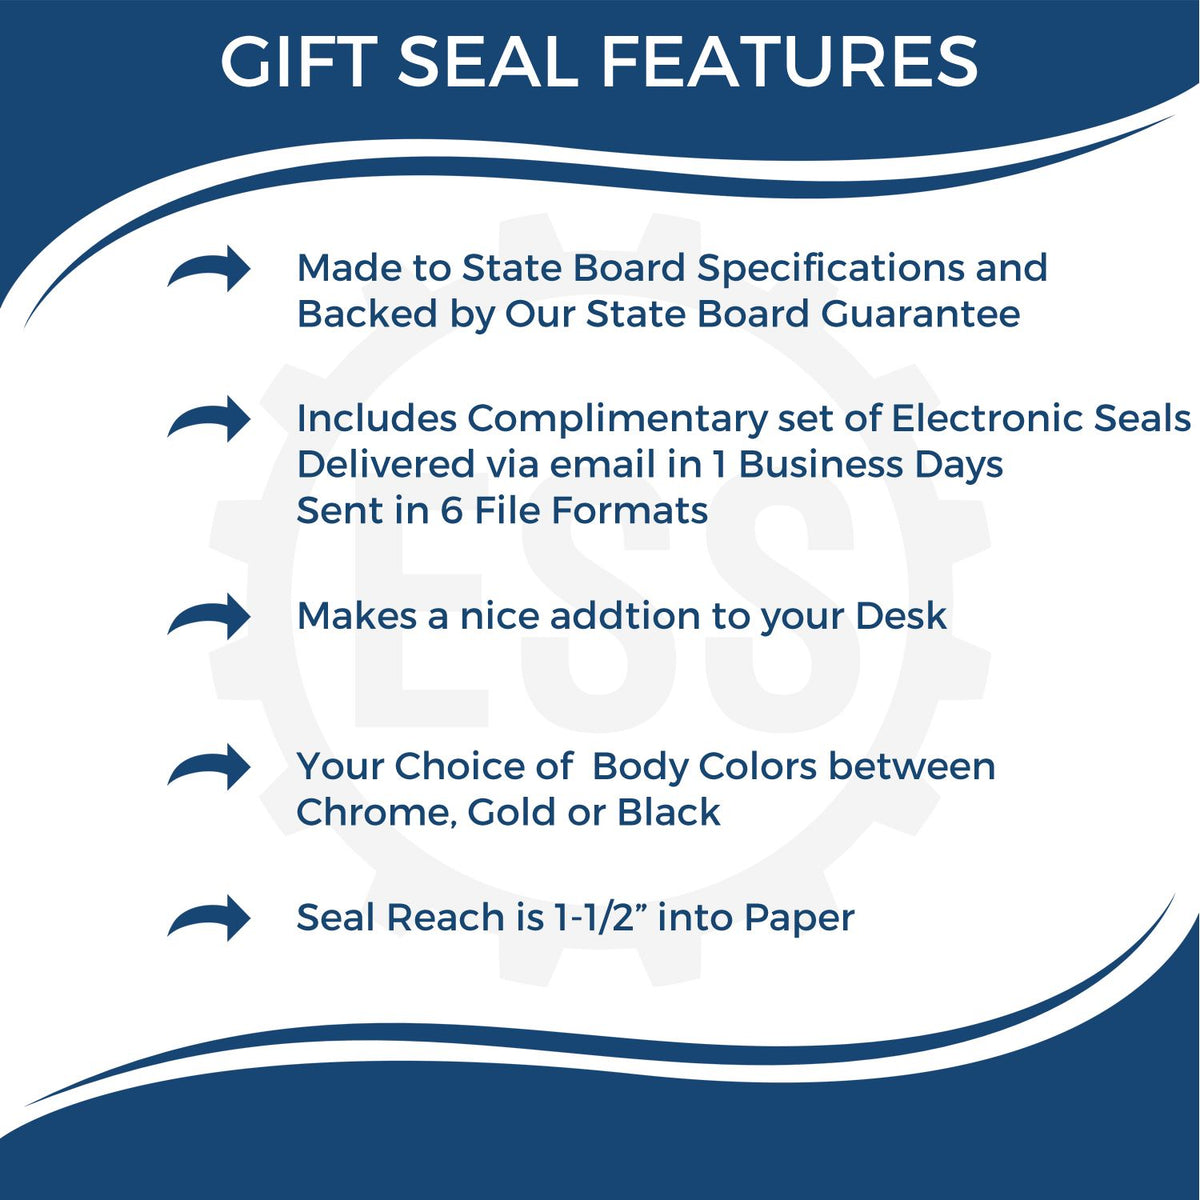 A picture of an infographic highlighting the selling points for the Gift Kentucky Engineer Seal